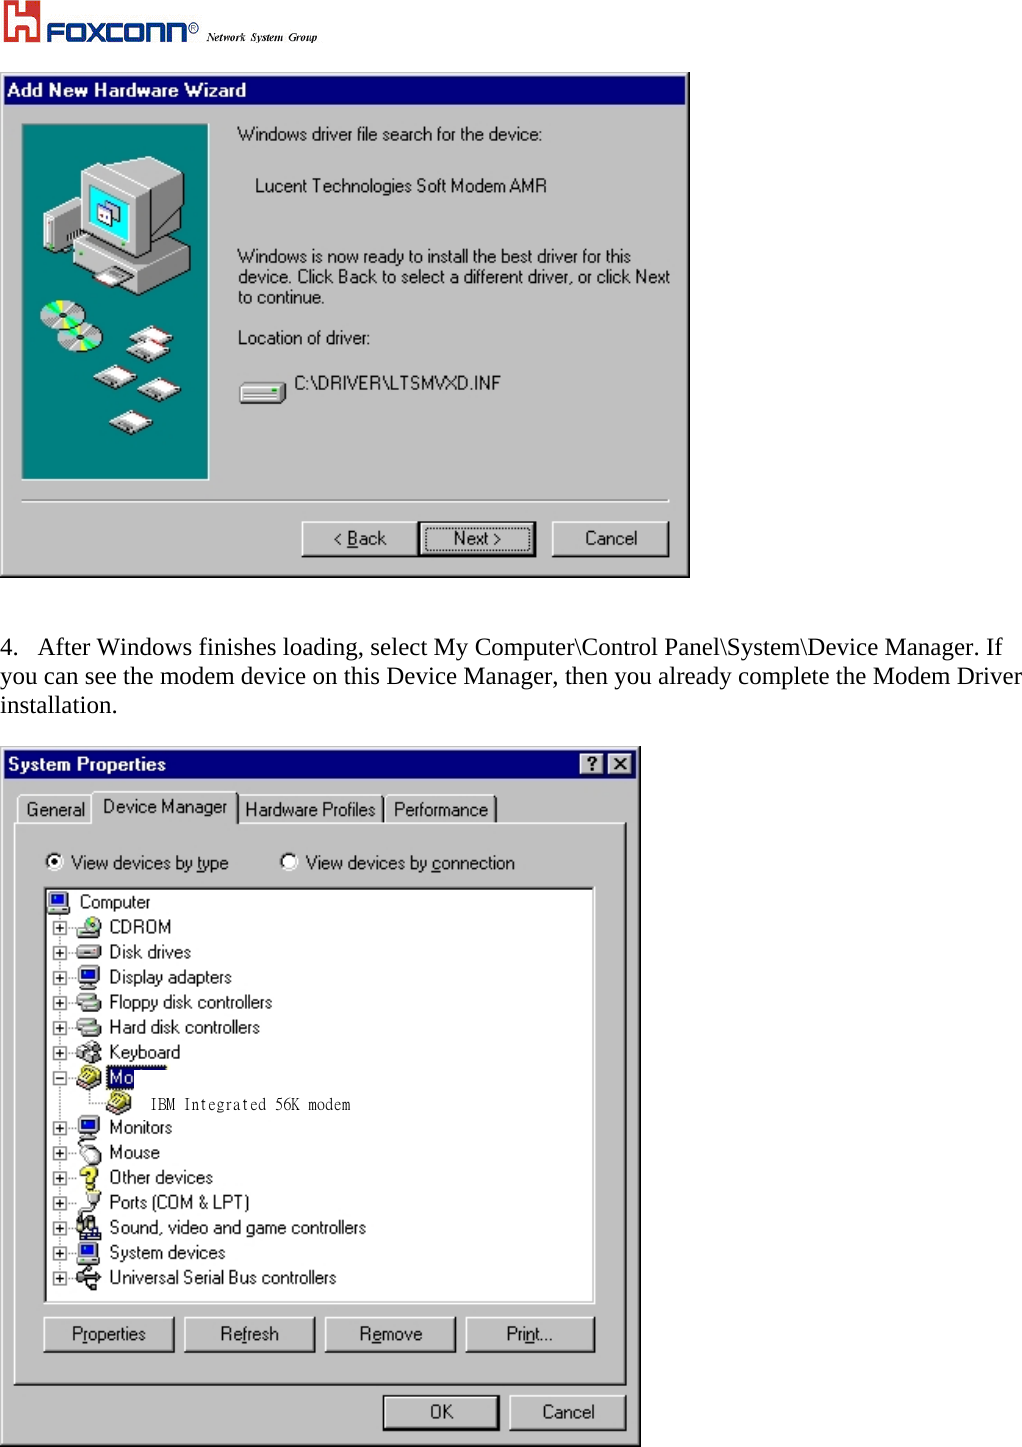     4.  After Windows finishes loading, select My Computer\Control Panel\System\Device Manager. If you can see the modem device on this Device Manager, then you already complete the Modem Driver installation.      IBM Integrated 56K modem 